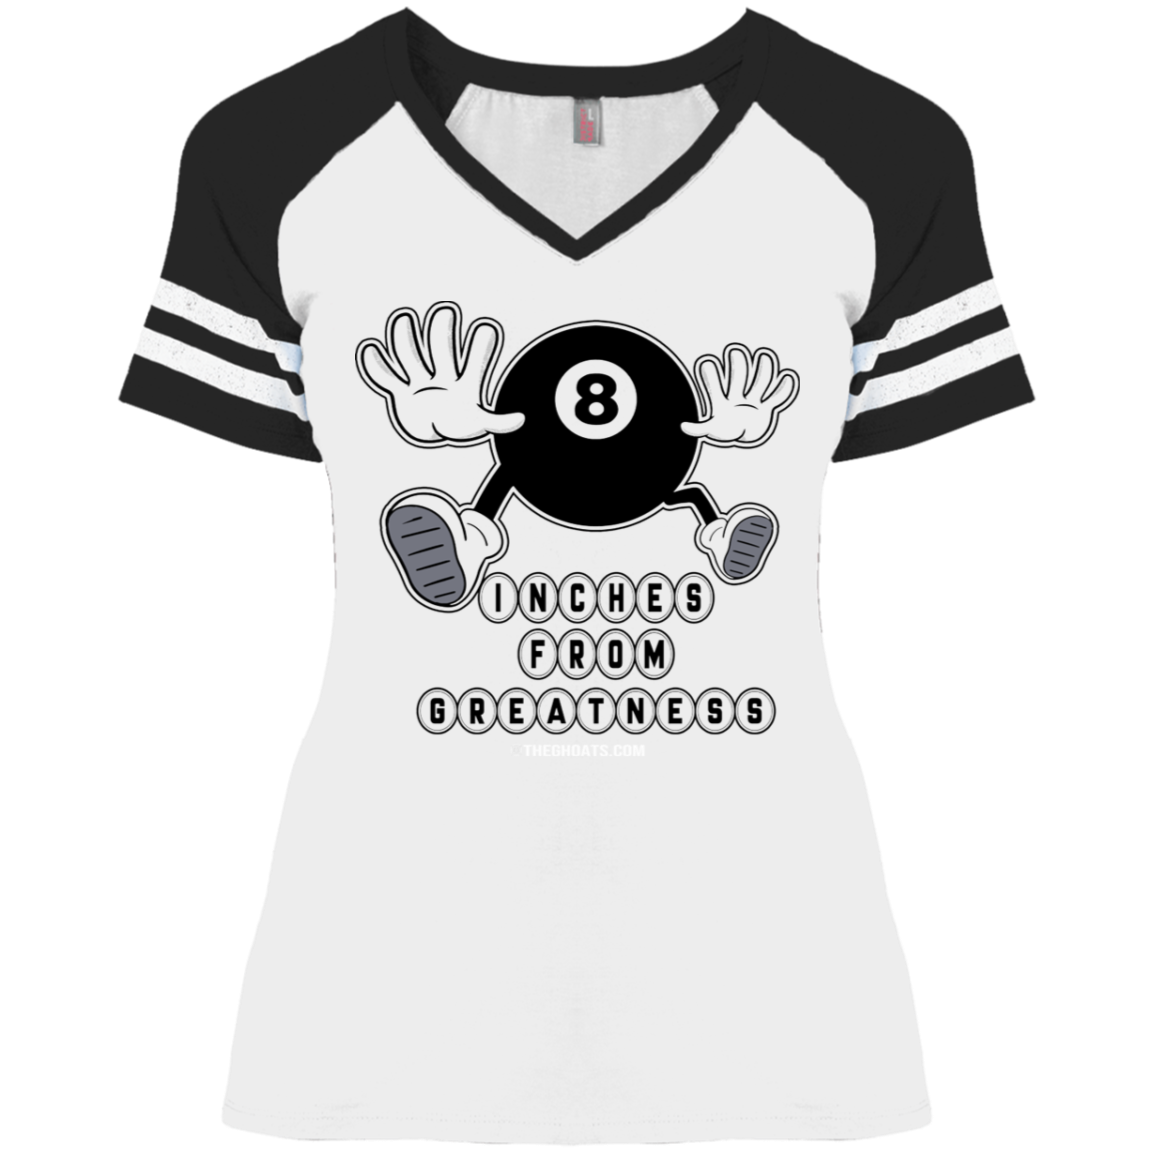 The GHOATS Custom Design #17. Inches From Greatness. Ladies' Game V-Neck T-Shirt